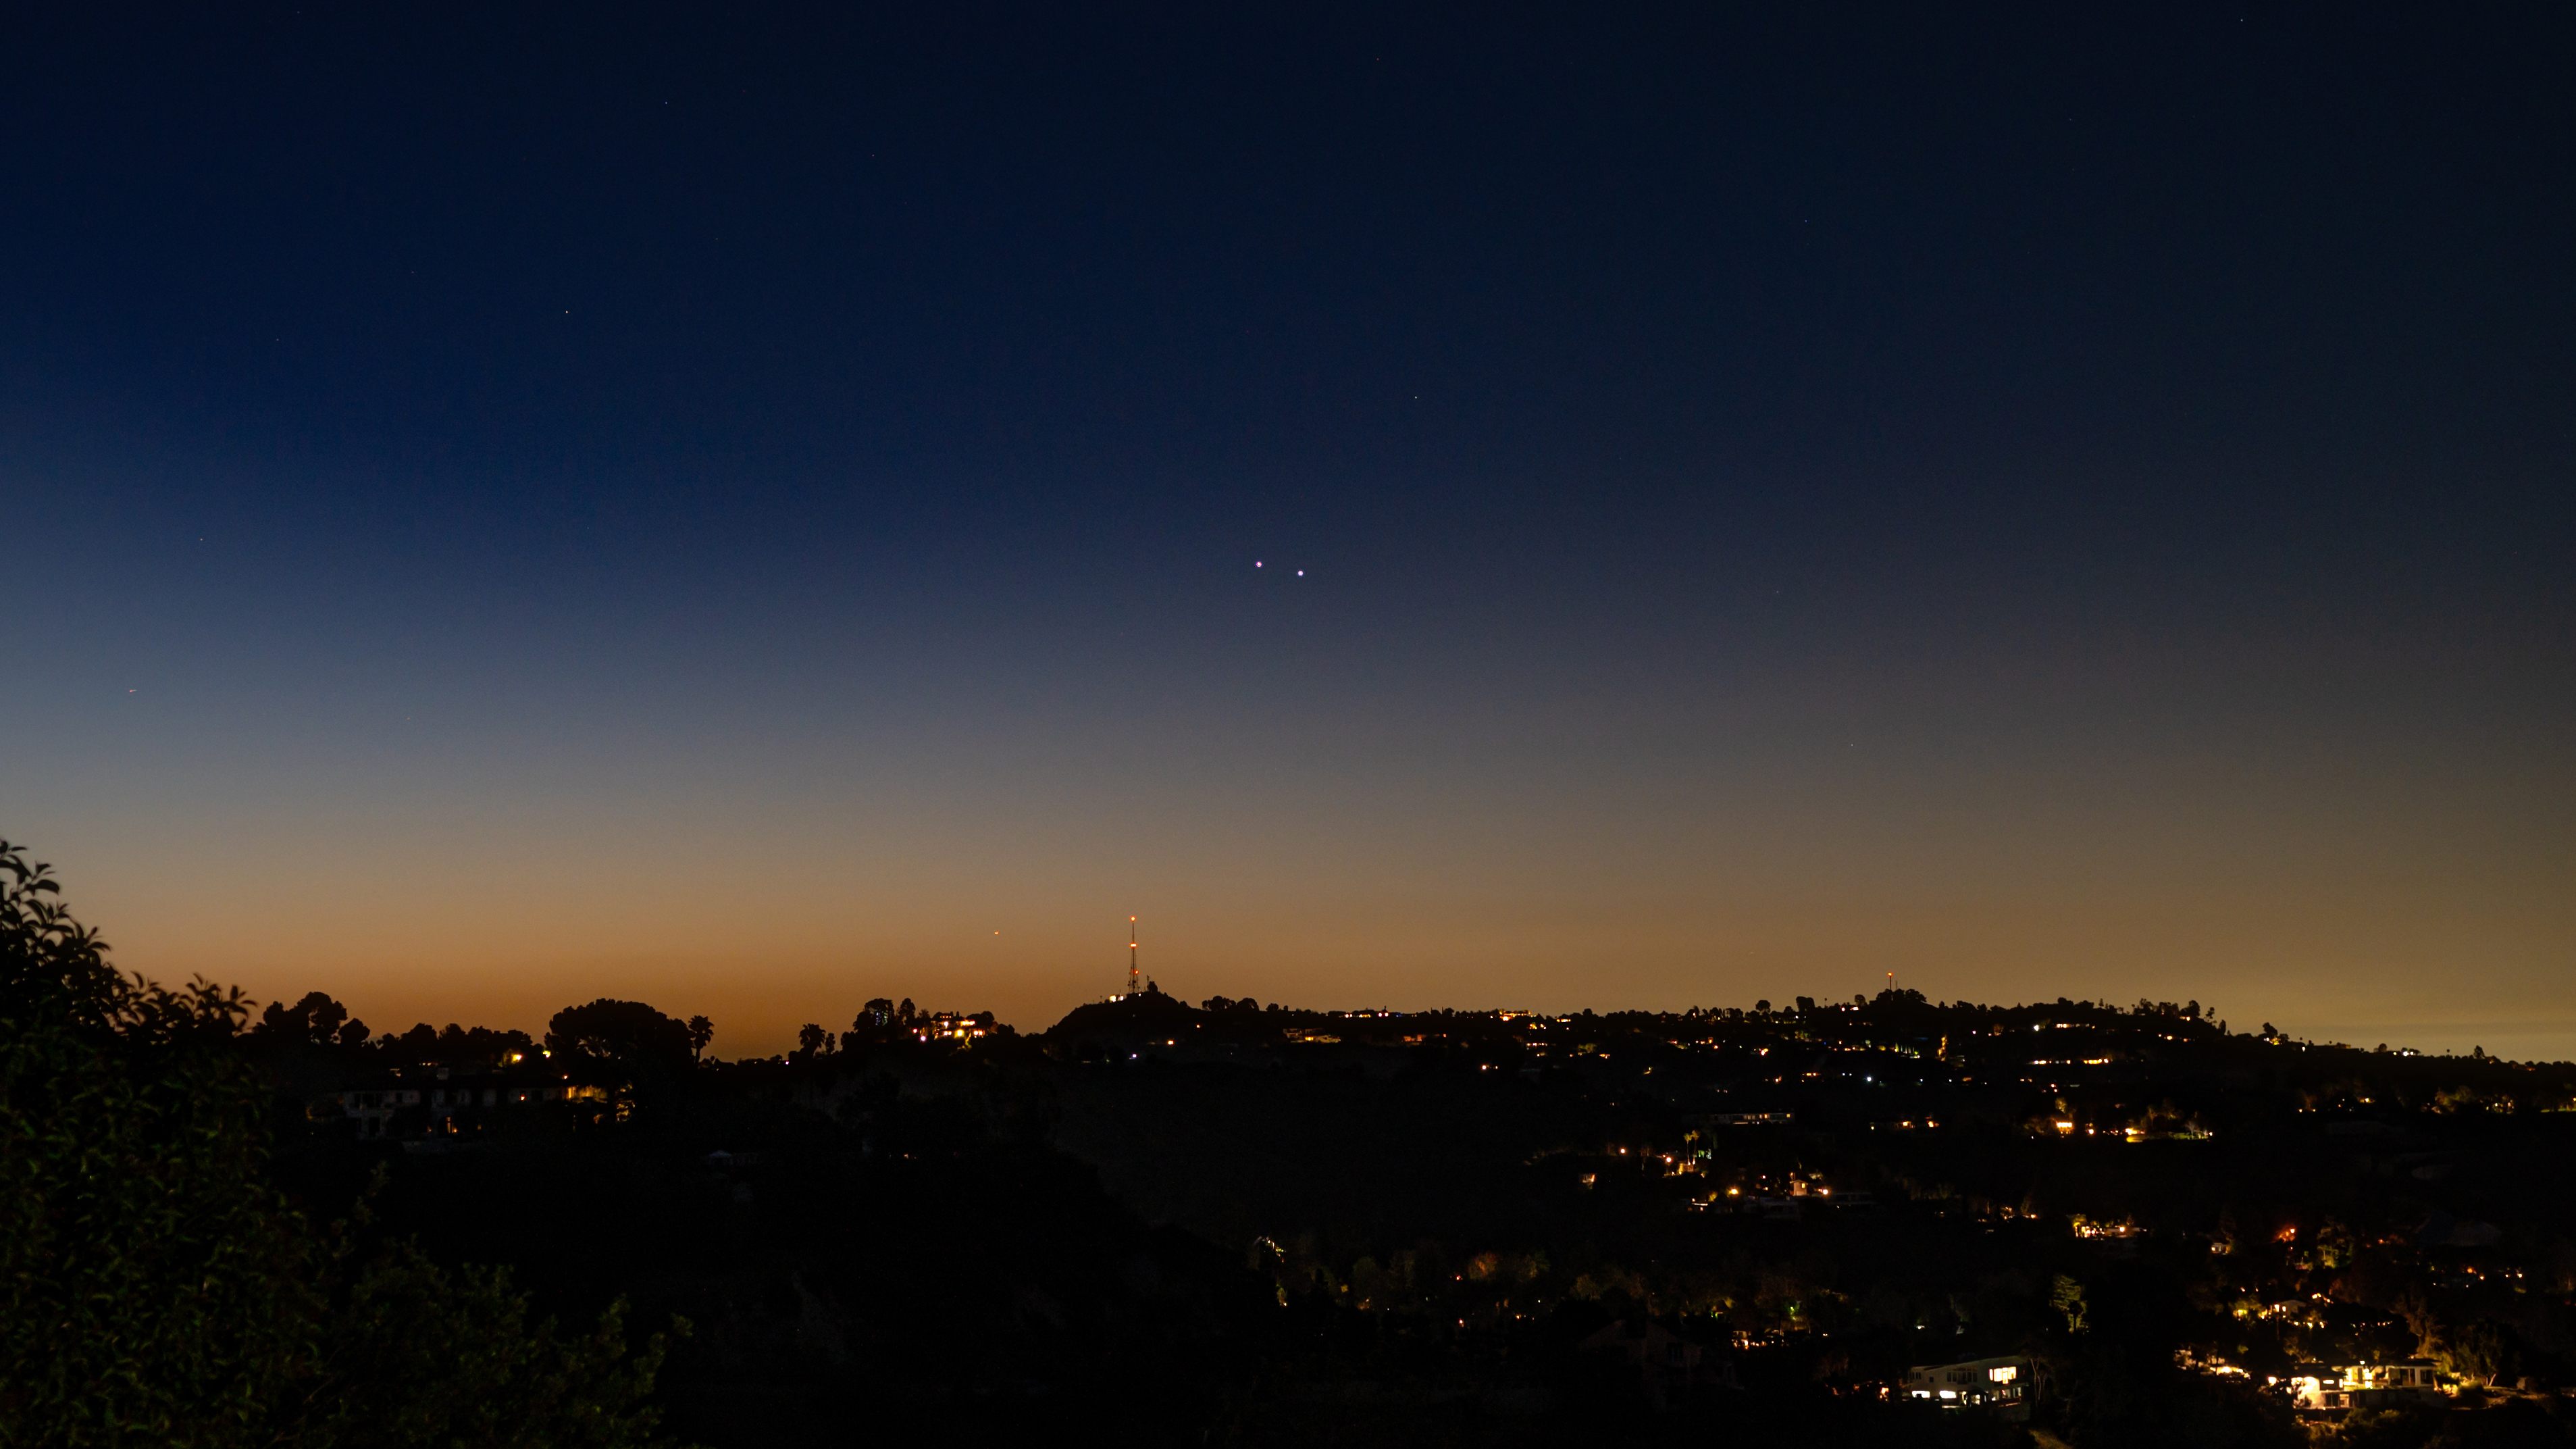 This photo shows the bright dot of Saturn rising over a twilight sky.